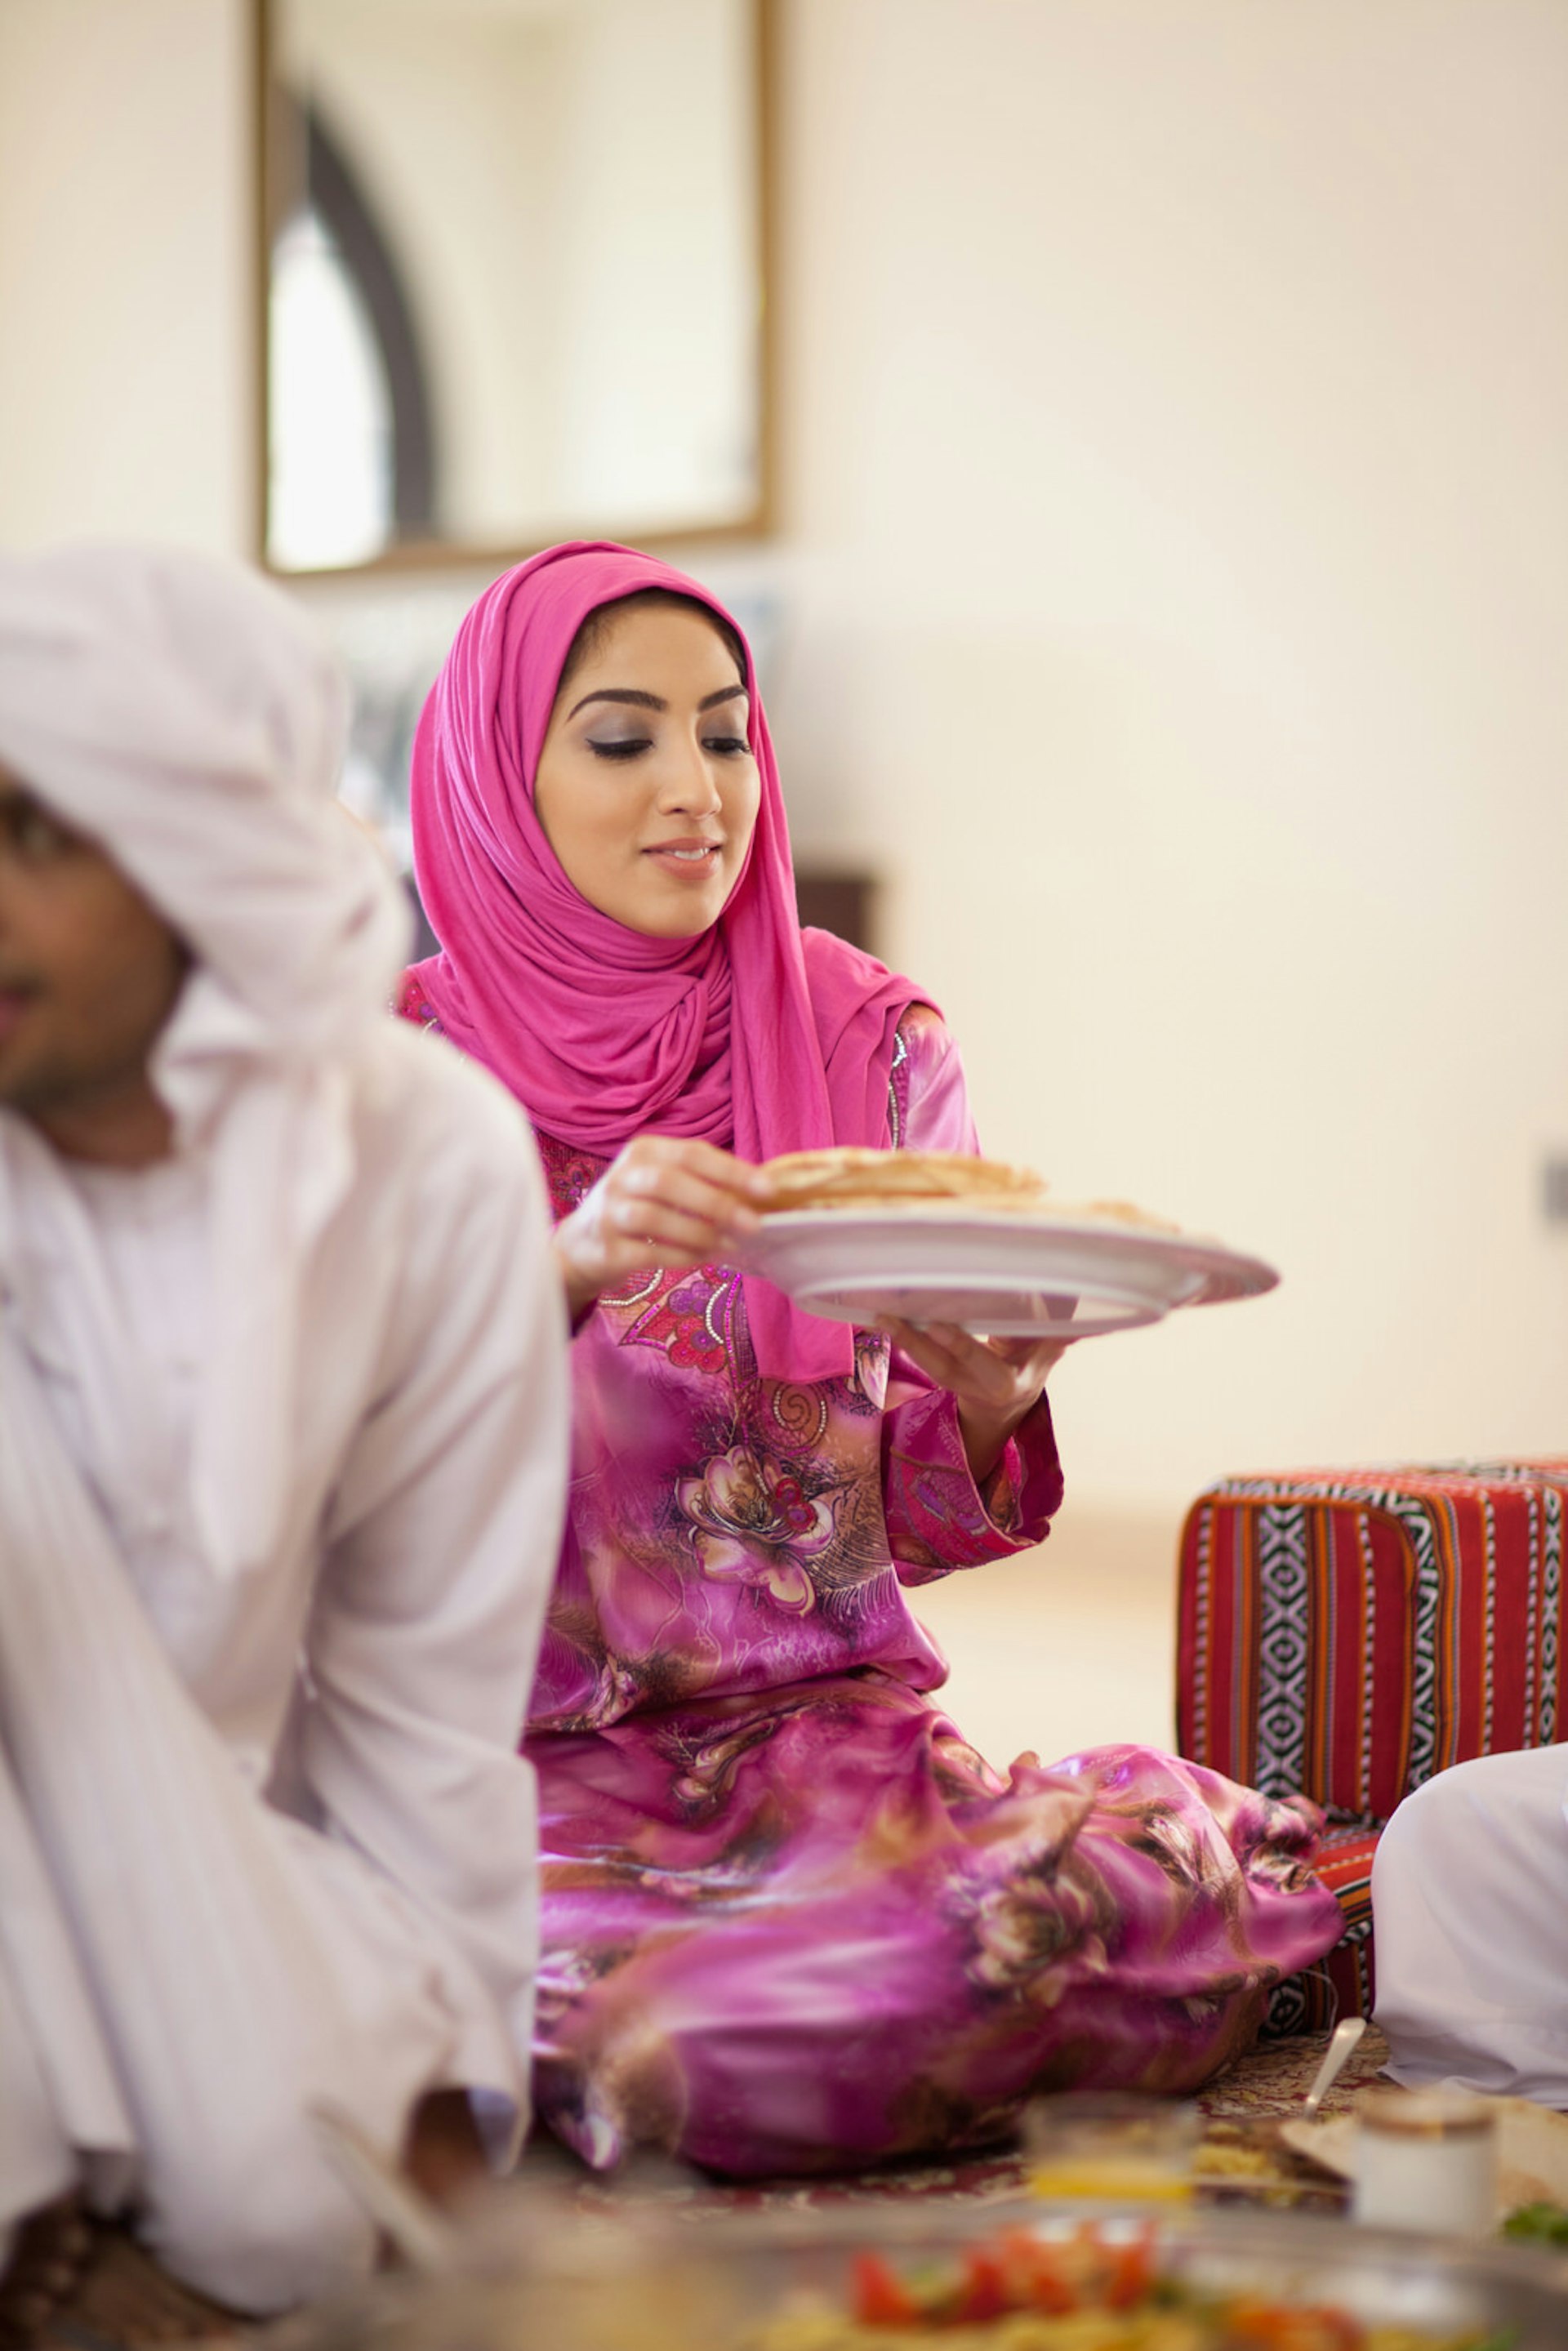 A Middle Eastern family breaks the fast with the meal called iftar during Ramadan